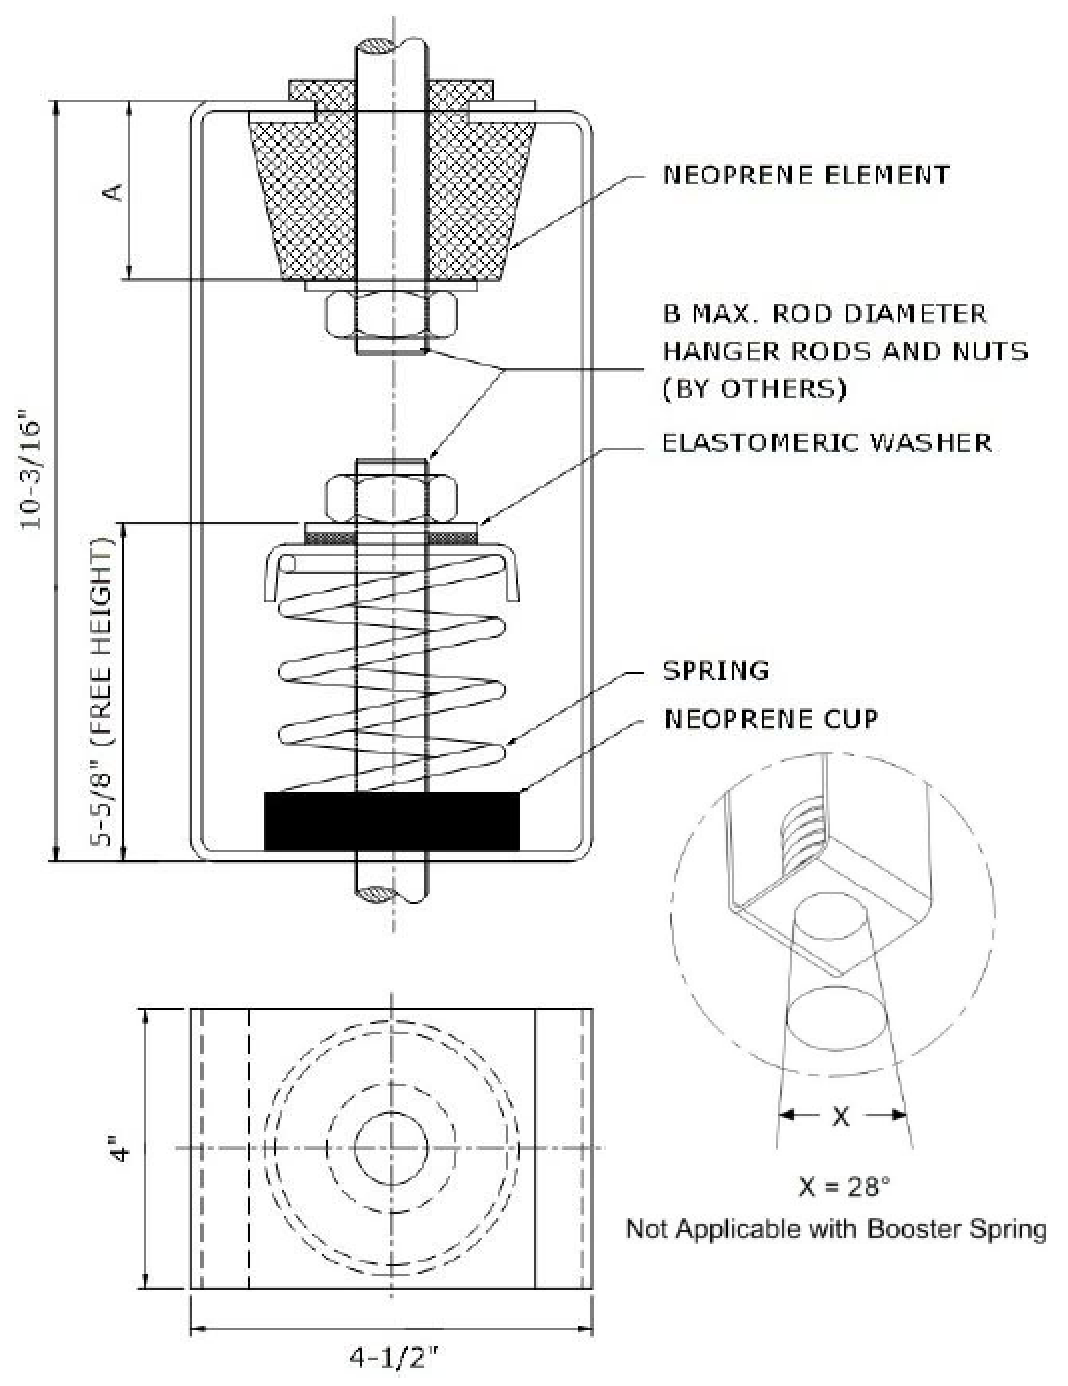 Isometric drawing showing dimensions for HVAC spring hanger